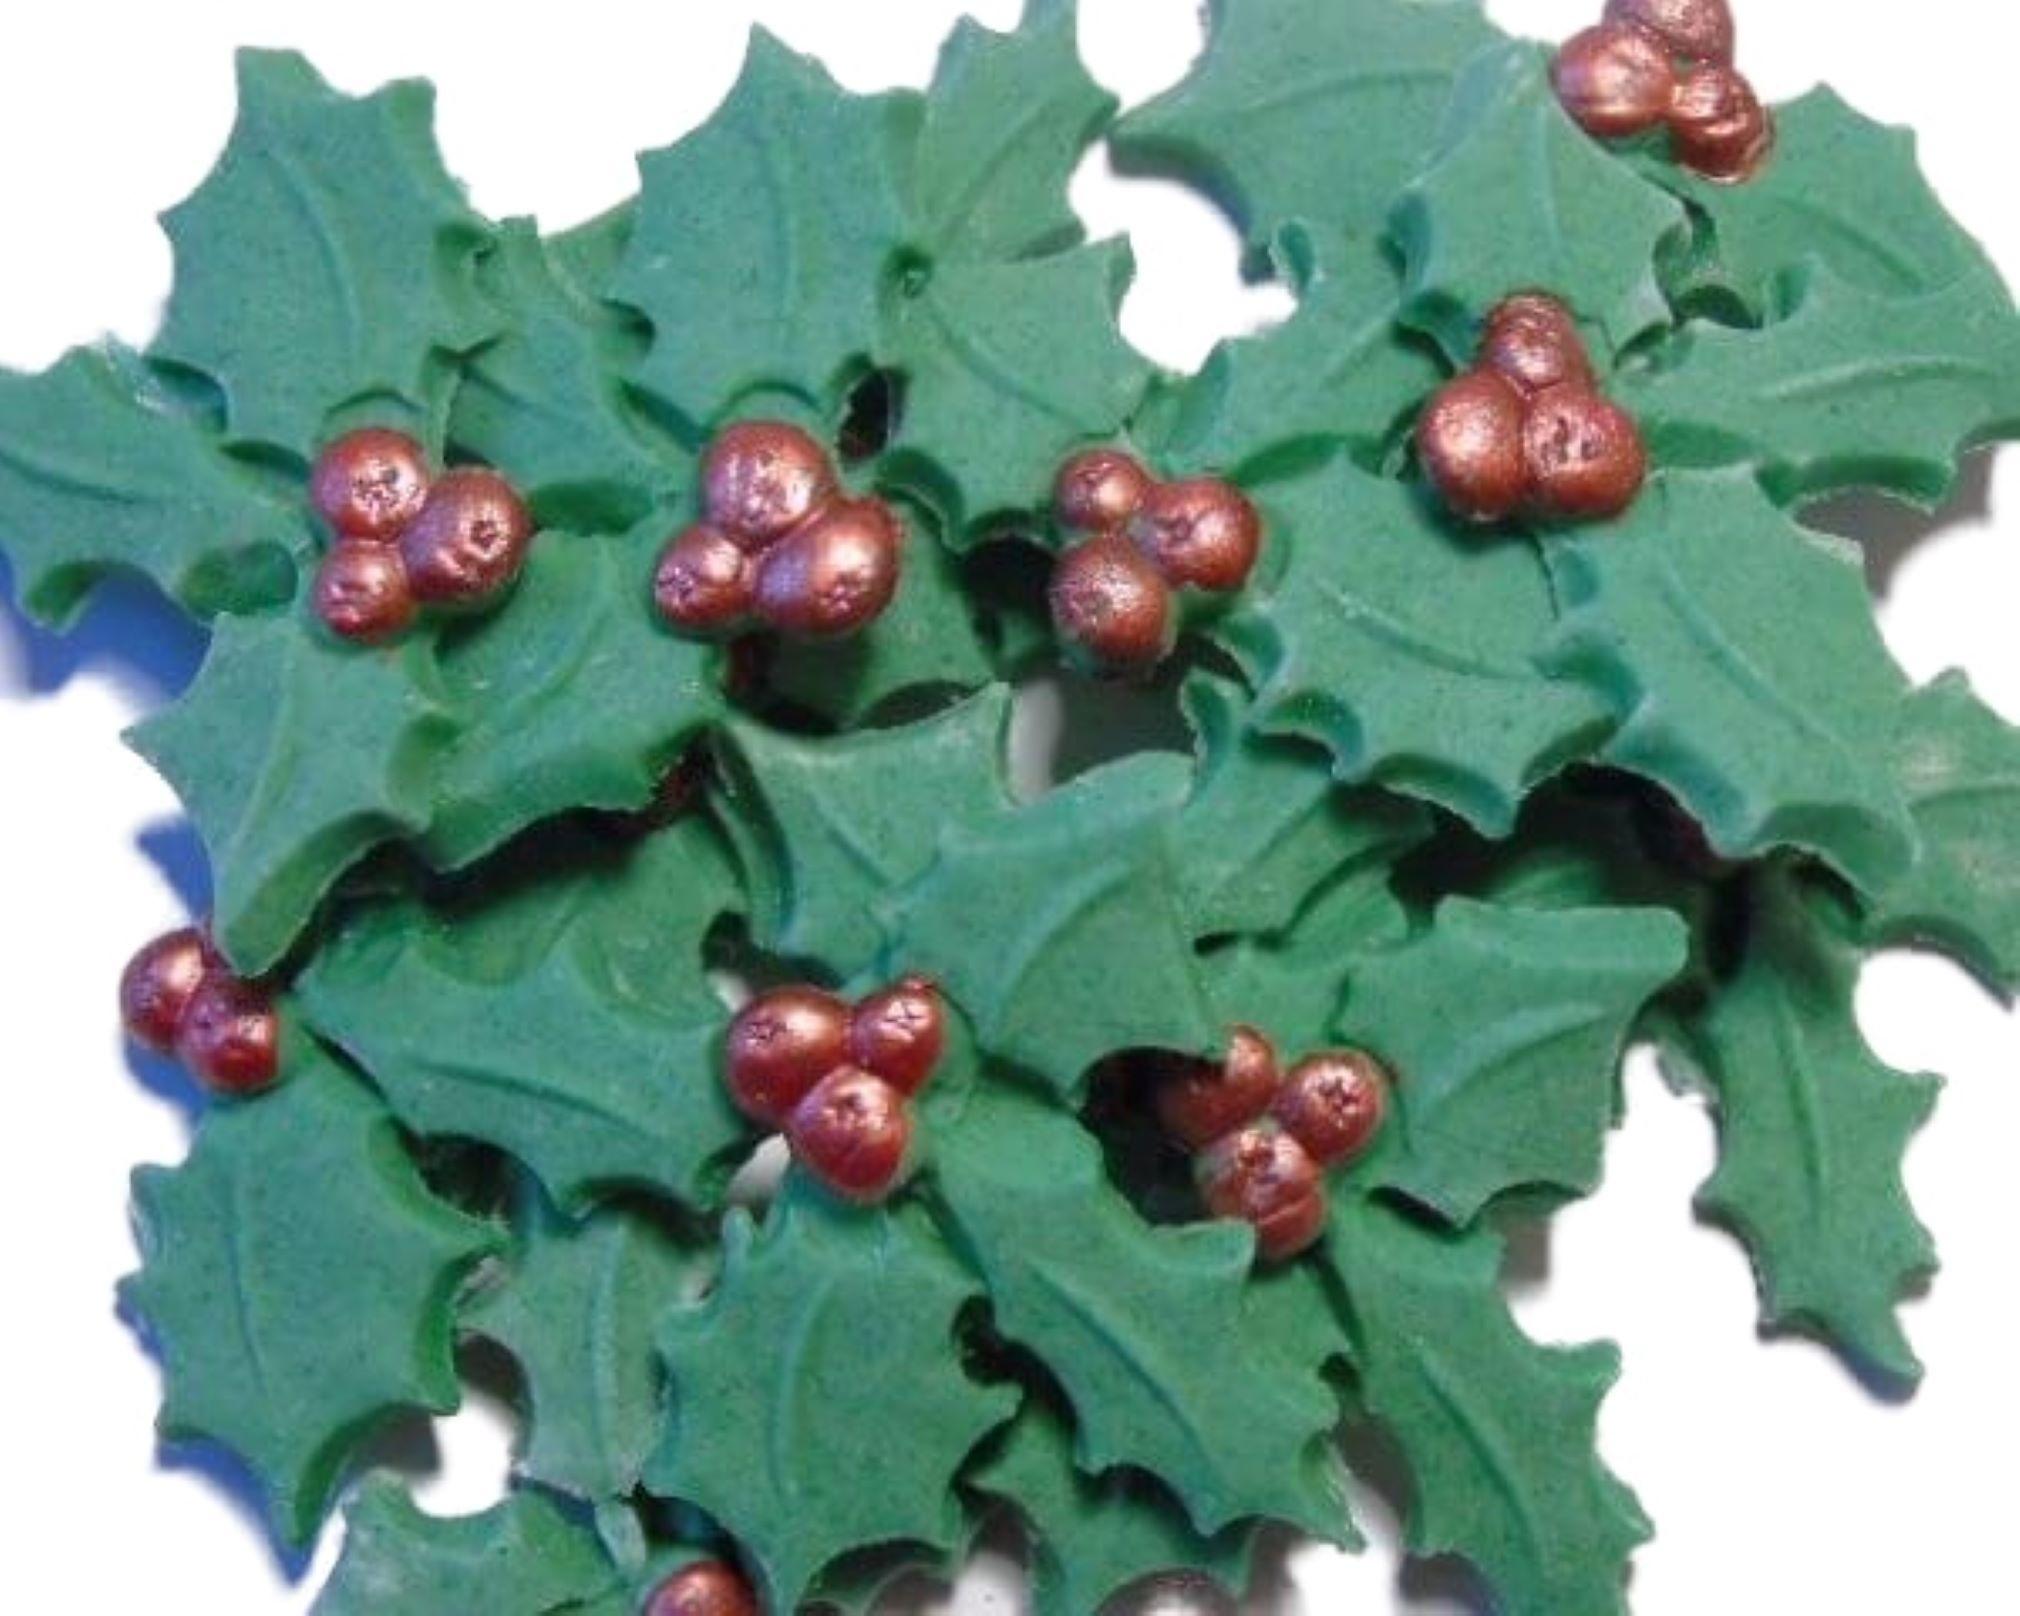 12 Holly Leaves with Berries Christmas Cupcake Cake Toppers